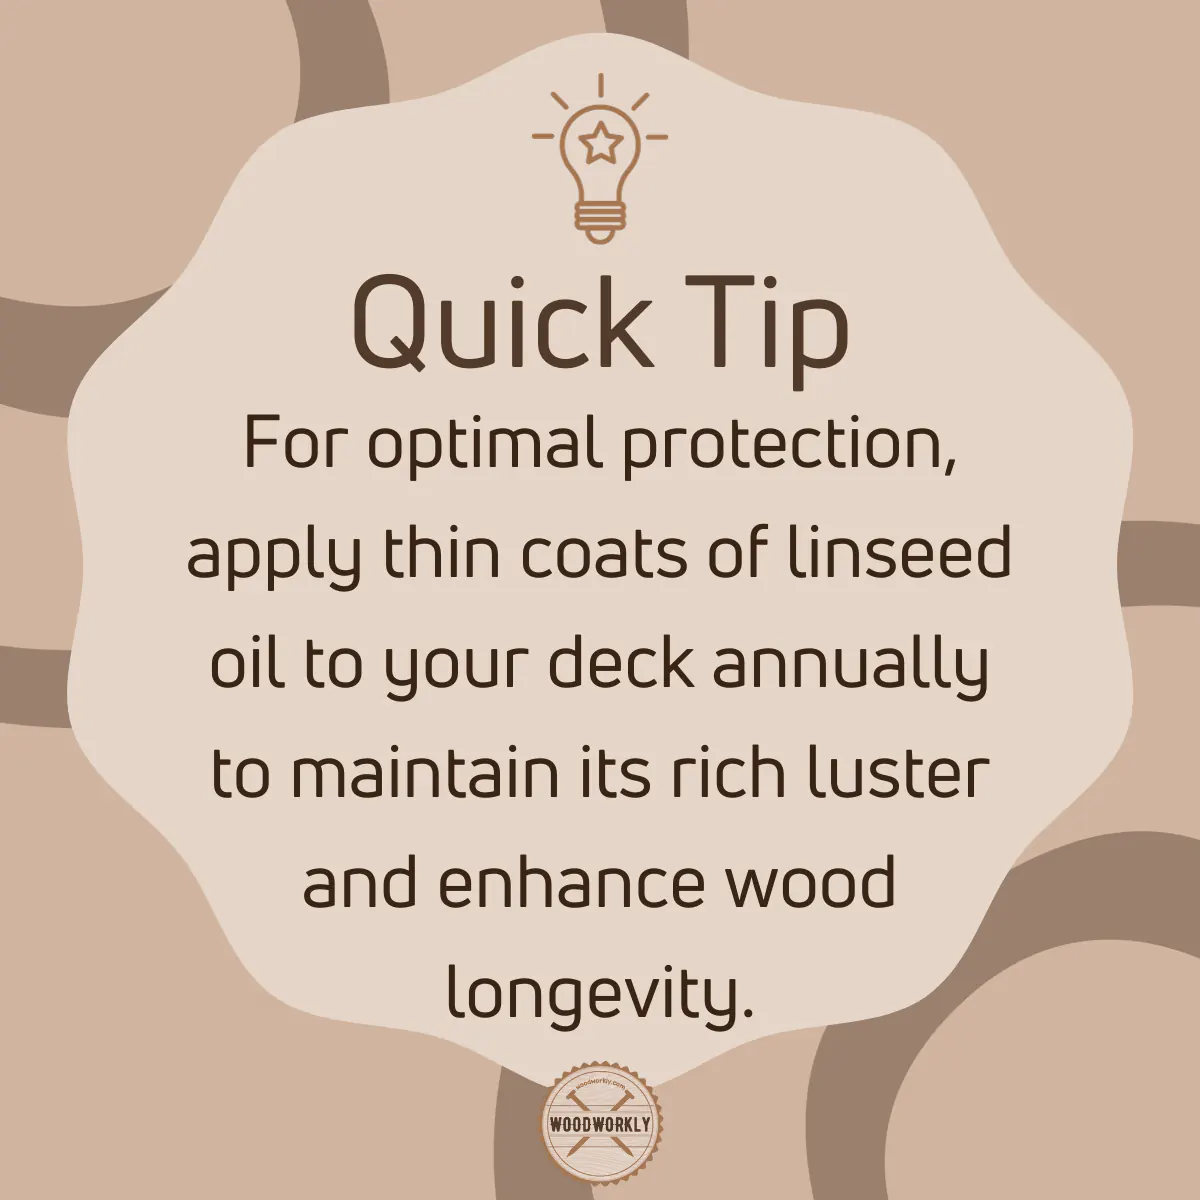 Tip for using linseed oil on deck